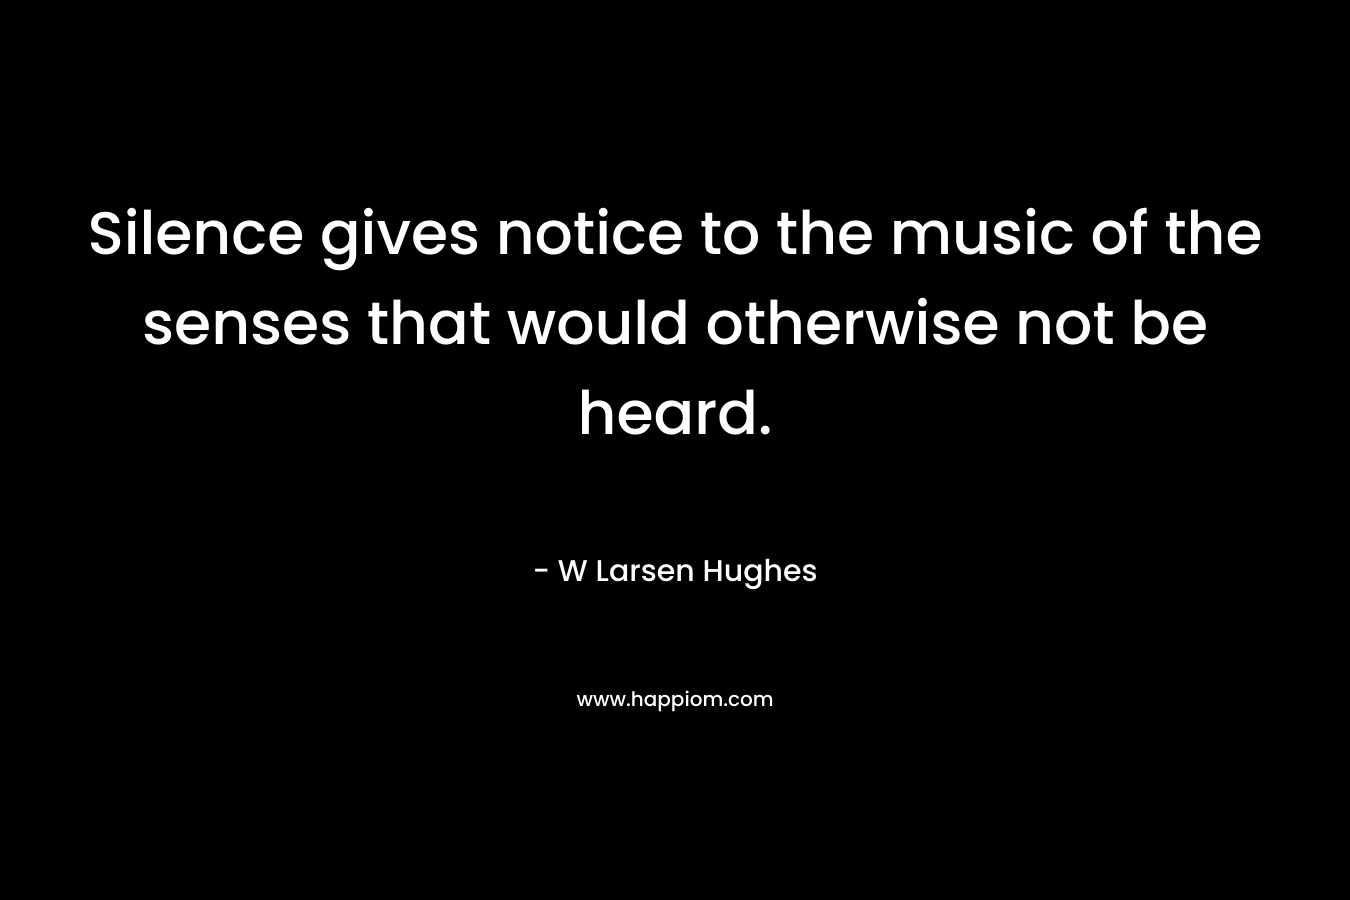 Silence gives notice to the music of the senses that would otherwise not be heard. – W Larsen Hughes